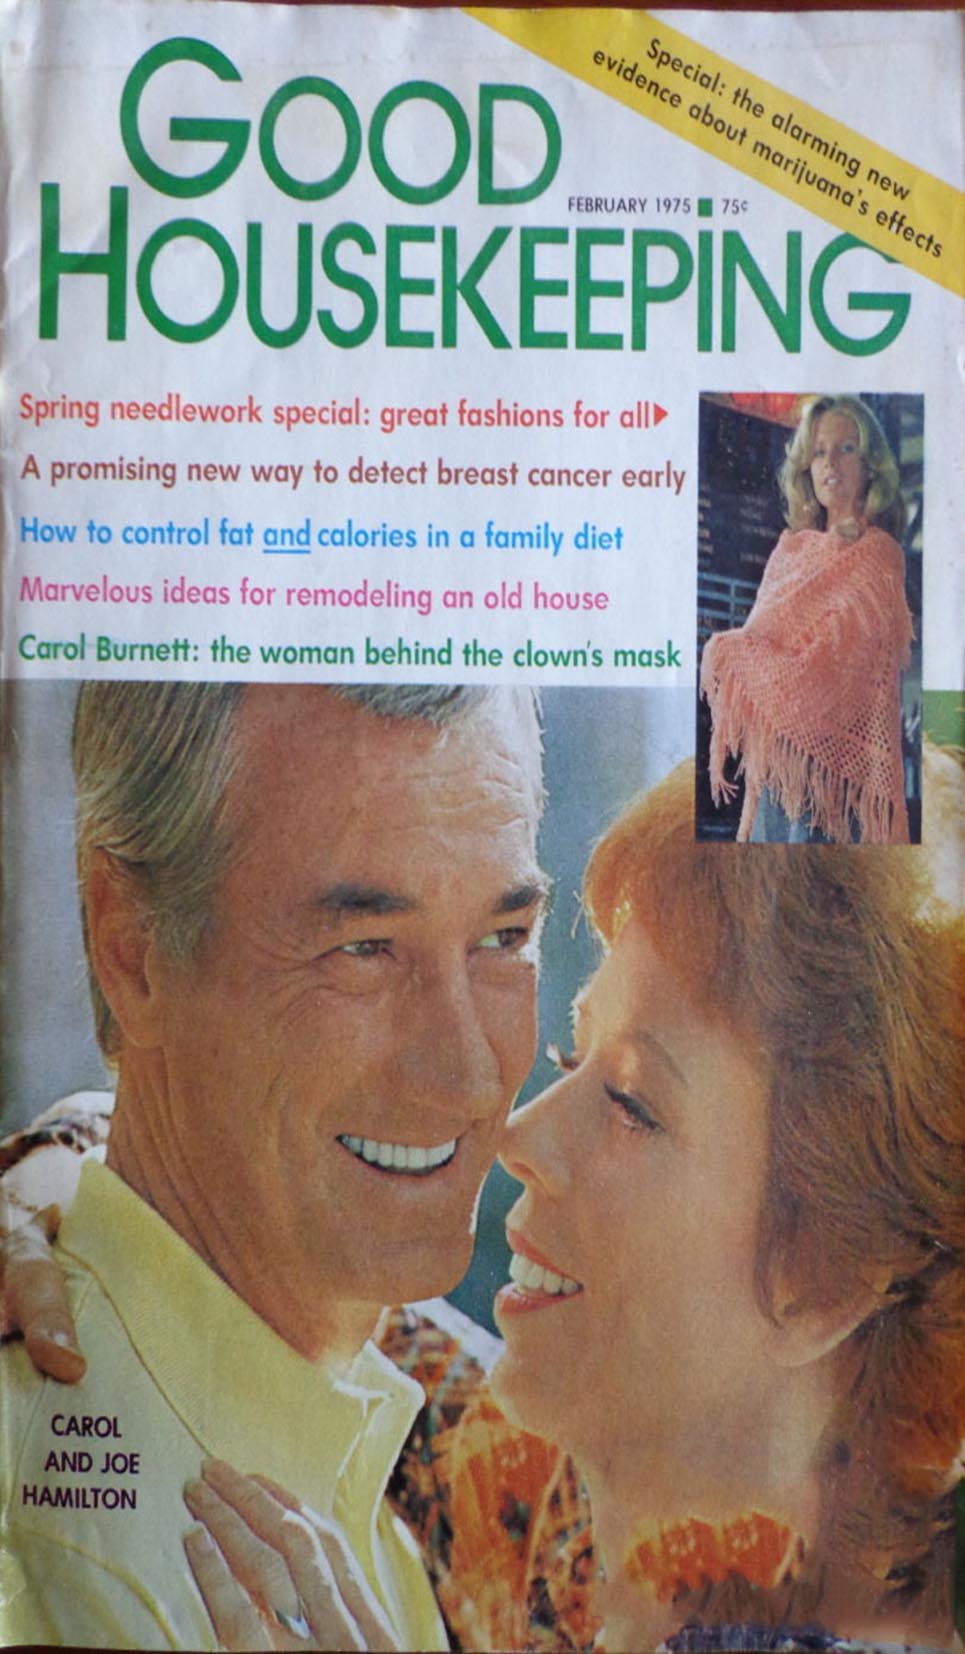 Good Housekeeping February 1975, Good Housekeeping February 1975 American womens magazine Back Issue Published by Hearst Publishing Corporation. Spring Needlework Special: Great Fashions For All., Spring Needlework Special: Great Fashions For All